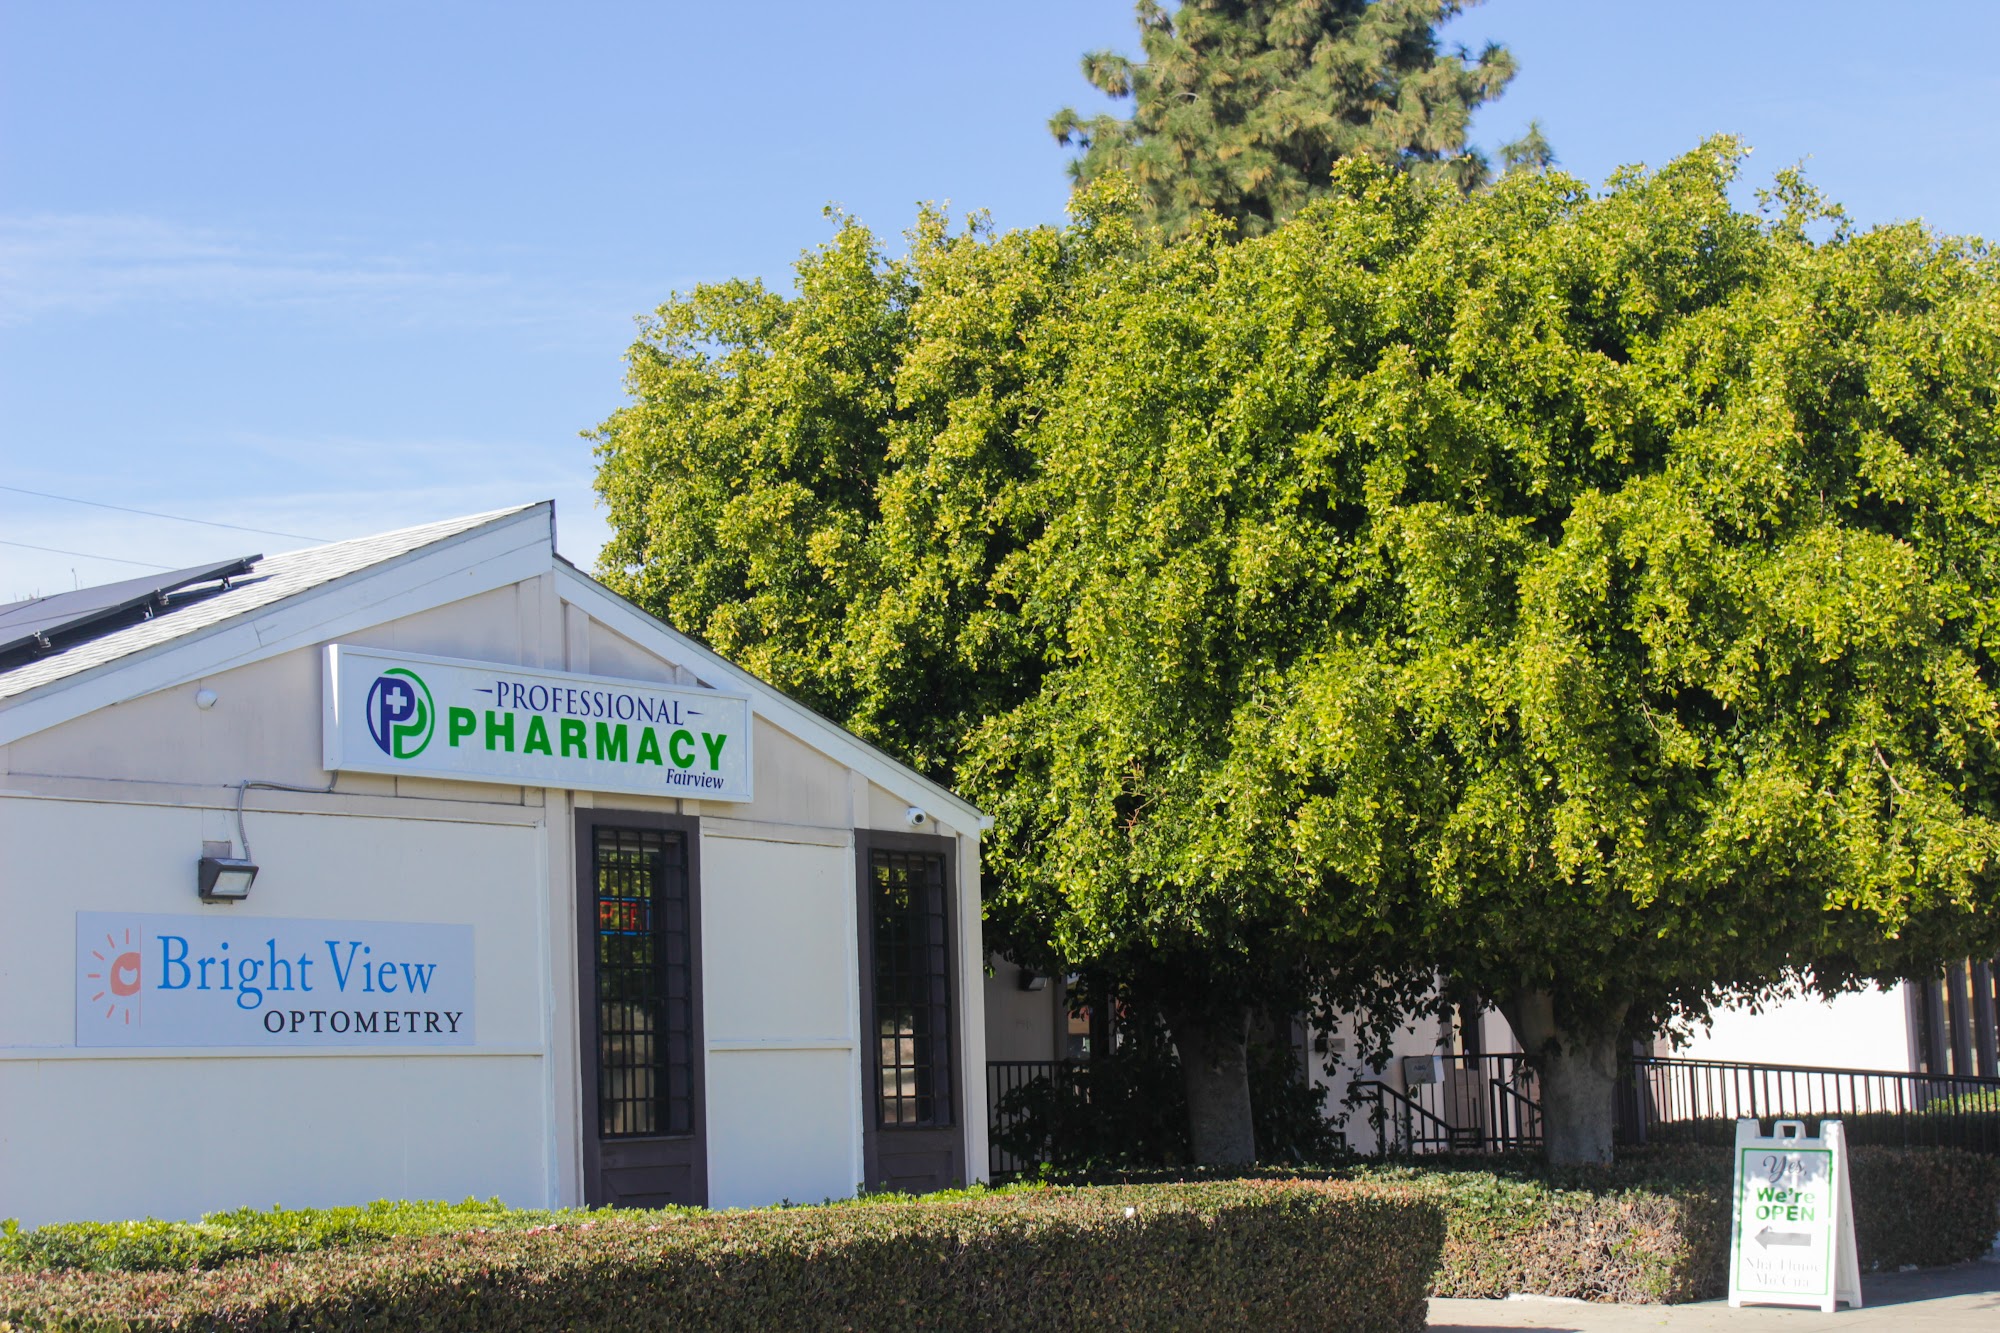 Professional Pharmacy Fairview (formerly MTM Pharmacy Fairview)